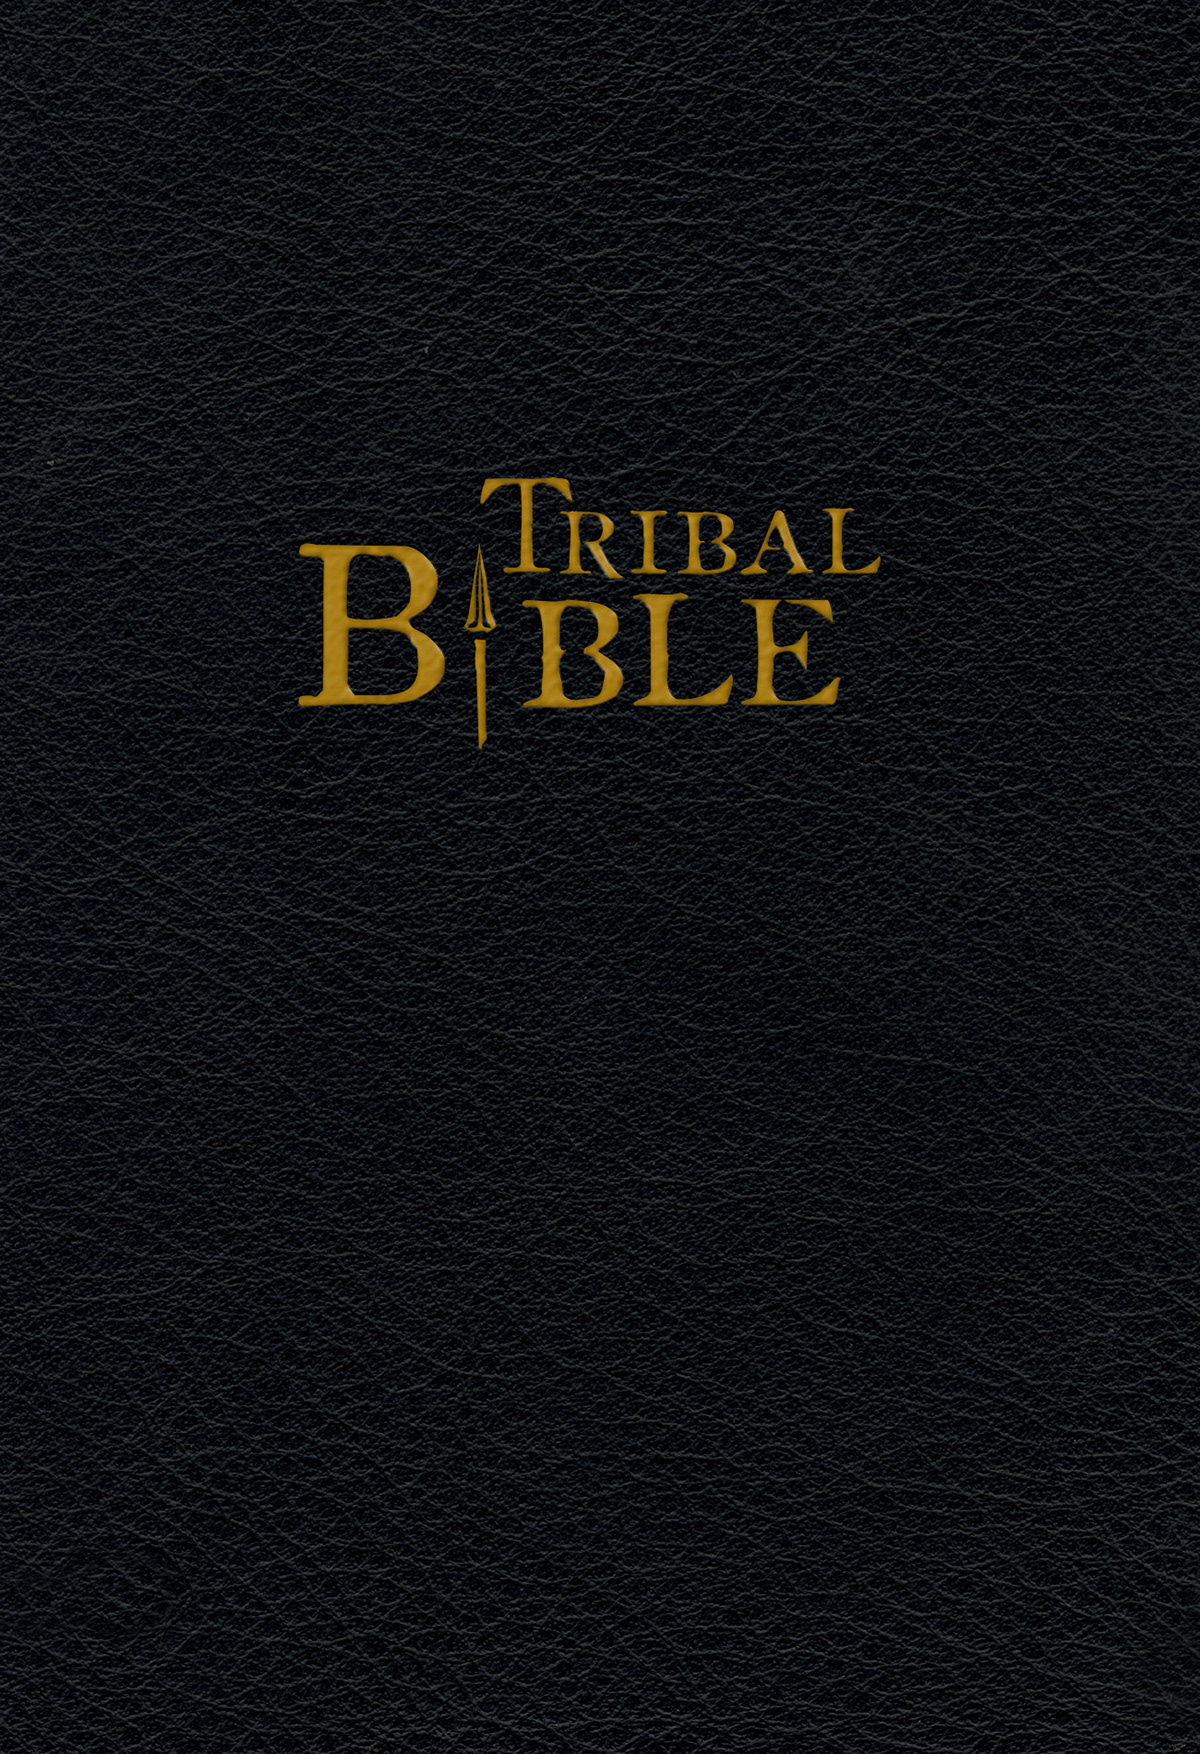 bible book oral tradition african Scripture